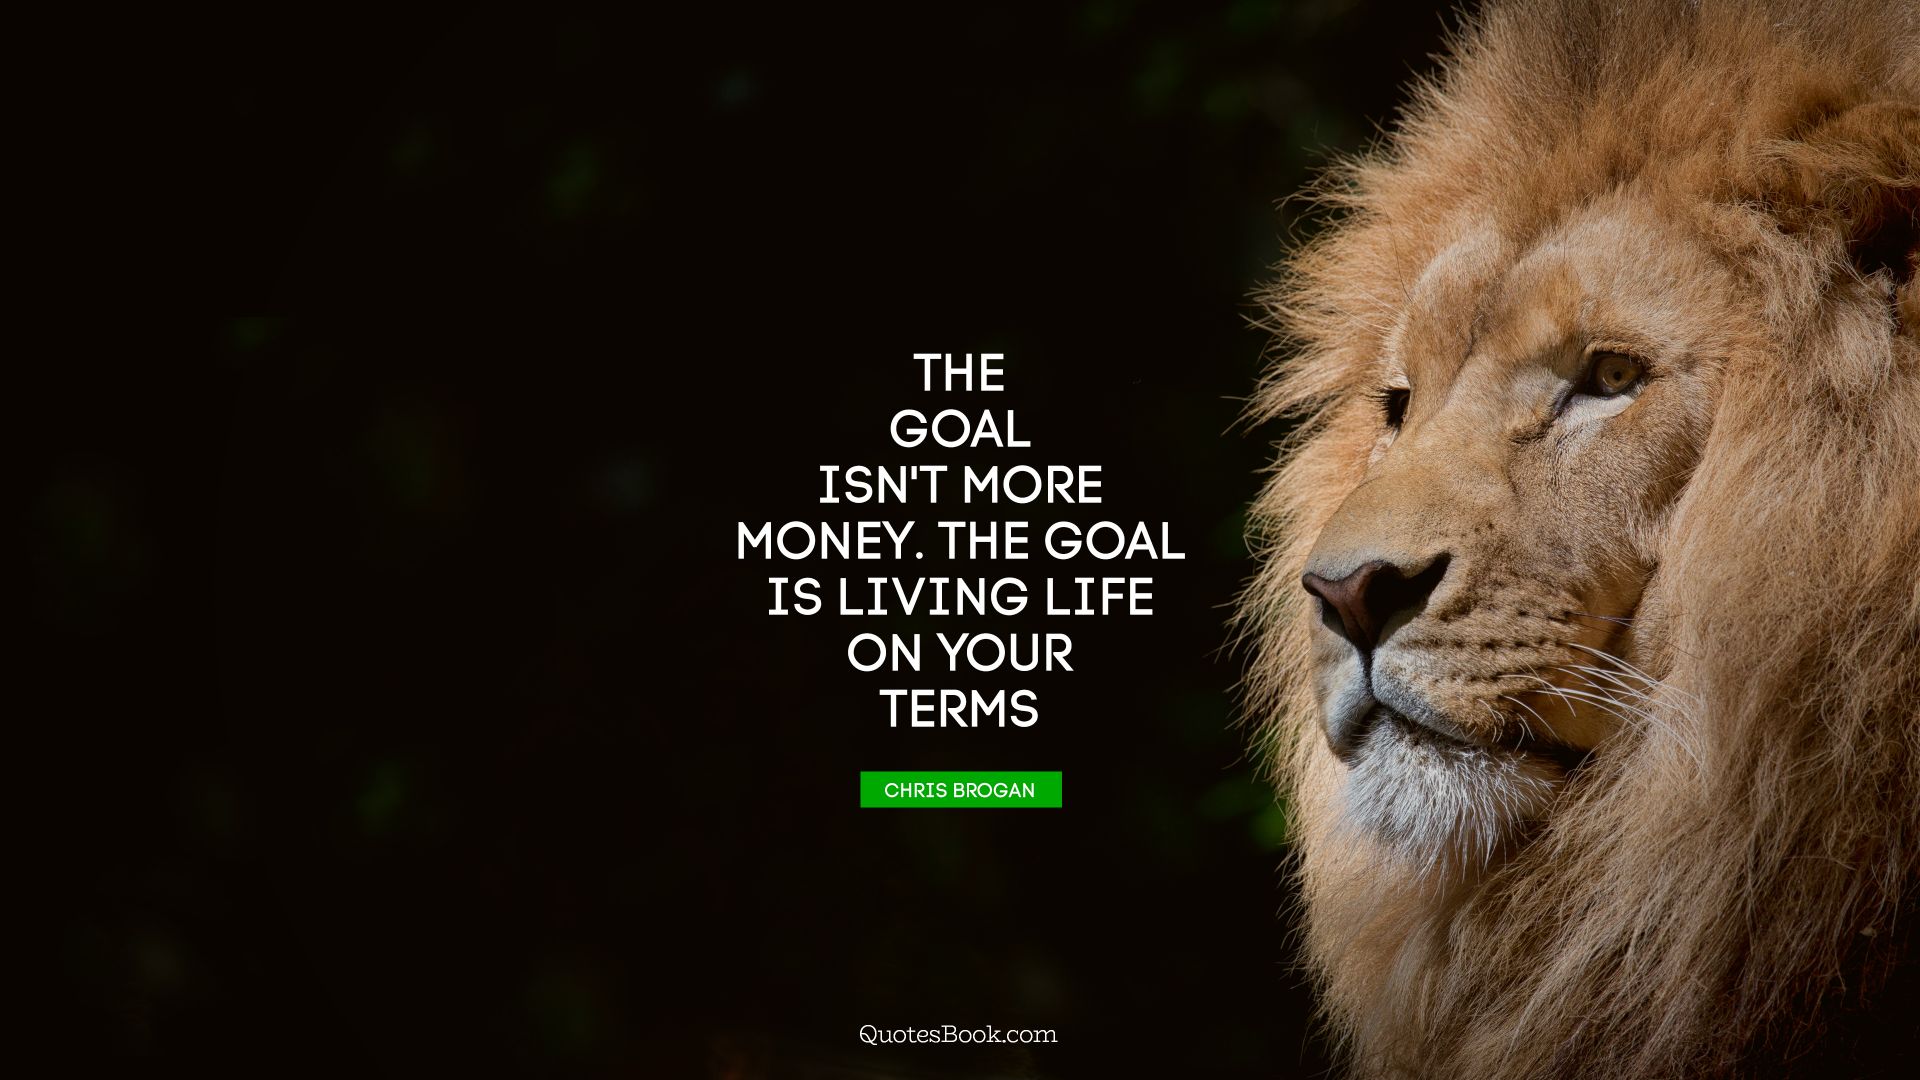 The goal isn't more money. The goal is living life on your terms. - Quote by Chris Brogan